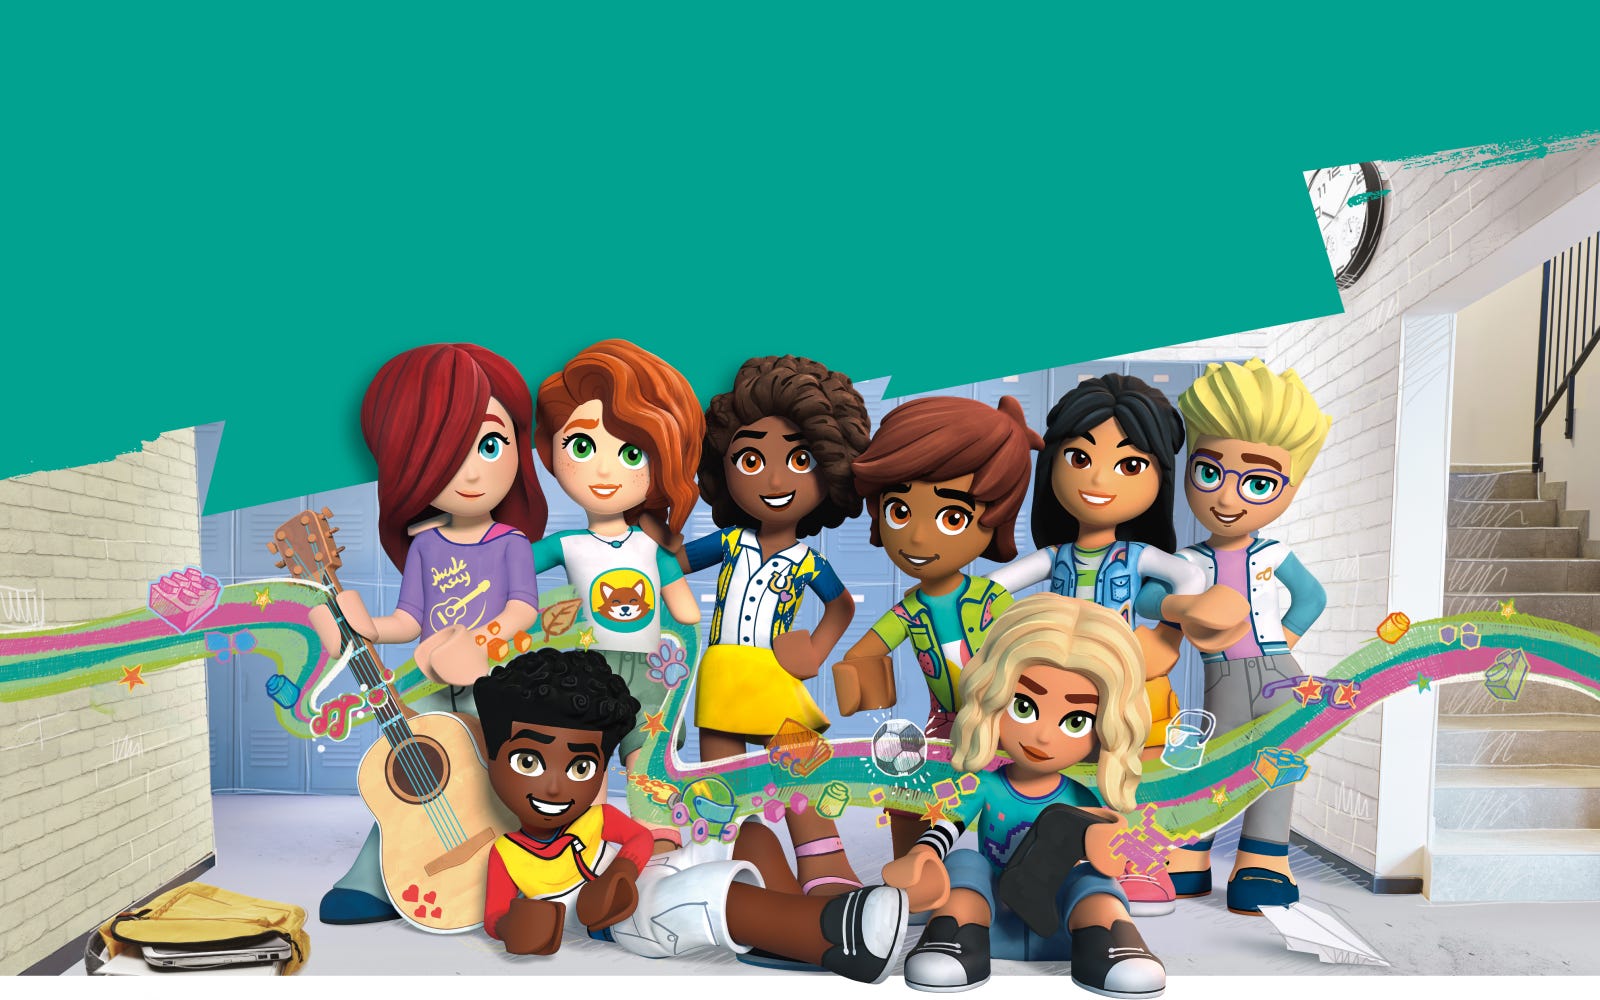 LEGO® Friends Introducing a world of friends | Official LEGO® Shop GB